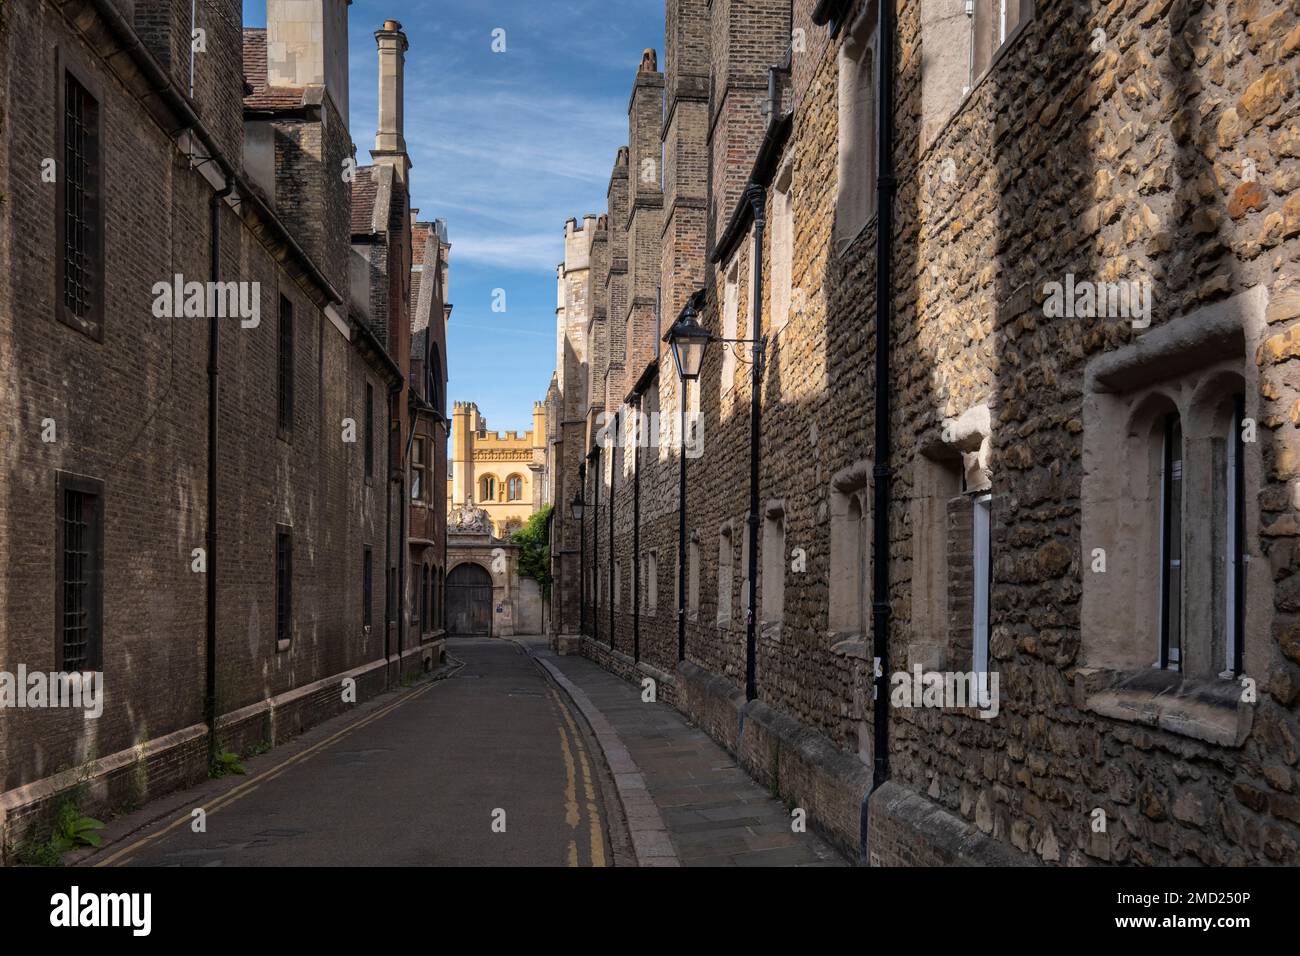 East Gate of Kings College Cambridge on Trinity Lane, Trinity Lane , Cambridge, Cambridgeshire, Angleterre, ROYAUME-UNI Banque D'Images